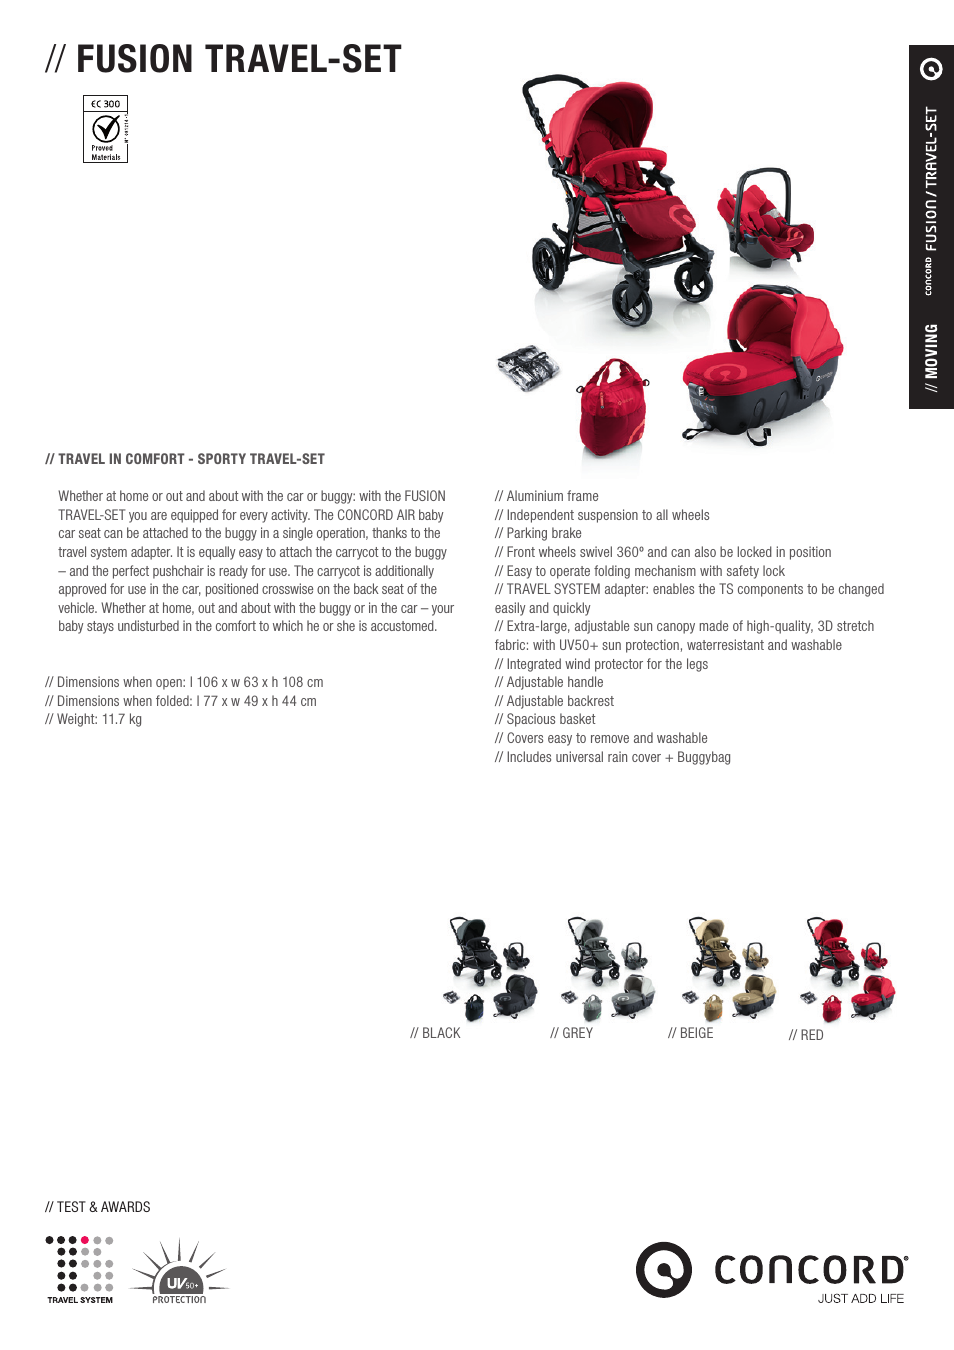 FUSION TRAVEL-SET PRODUCT INFORMATION